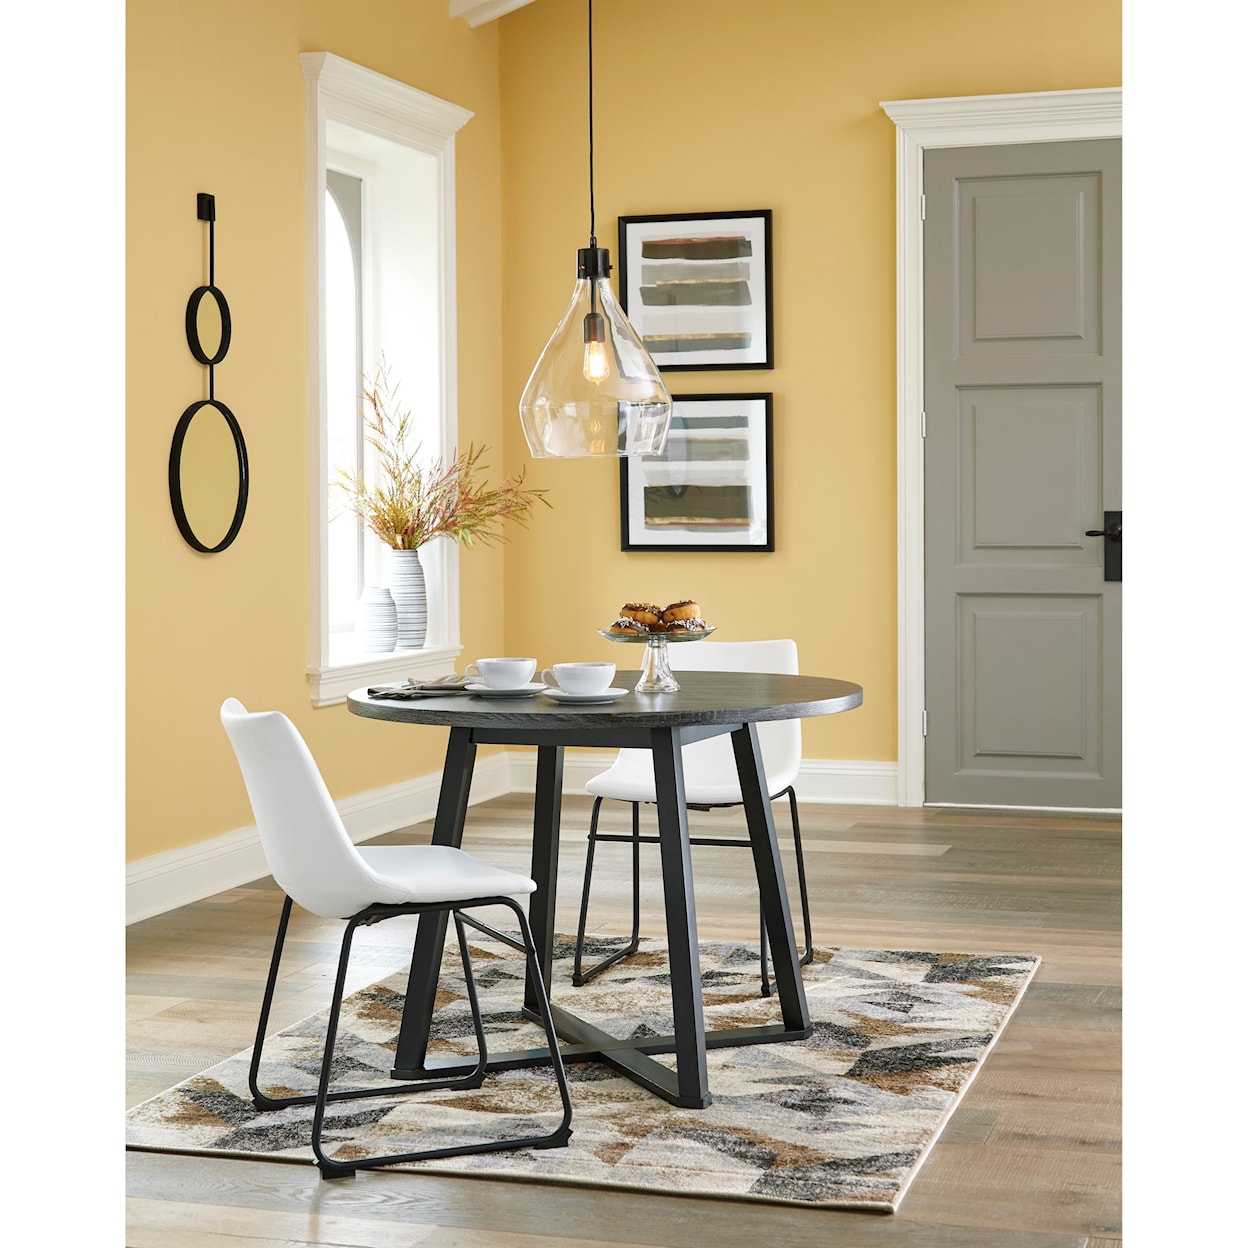 Signature Design by Ashley Centiar 3pc Dining Room Group